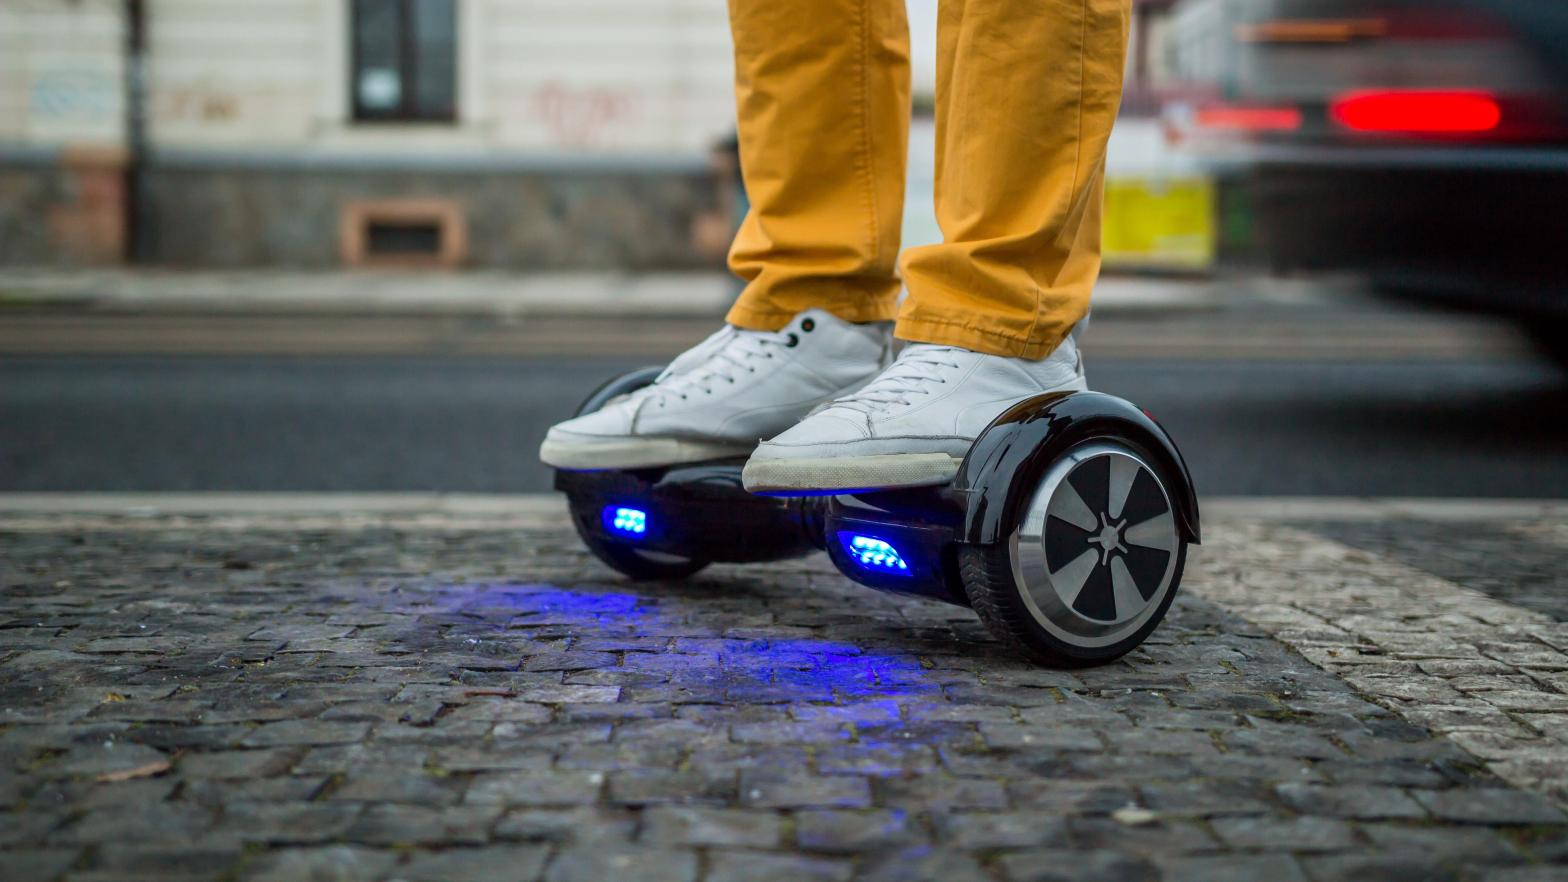 Hoverboards  were a staple of mid-2010's Internet pop culture. (Image: Fedorovacz, Shutterstock)